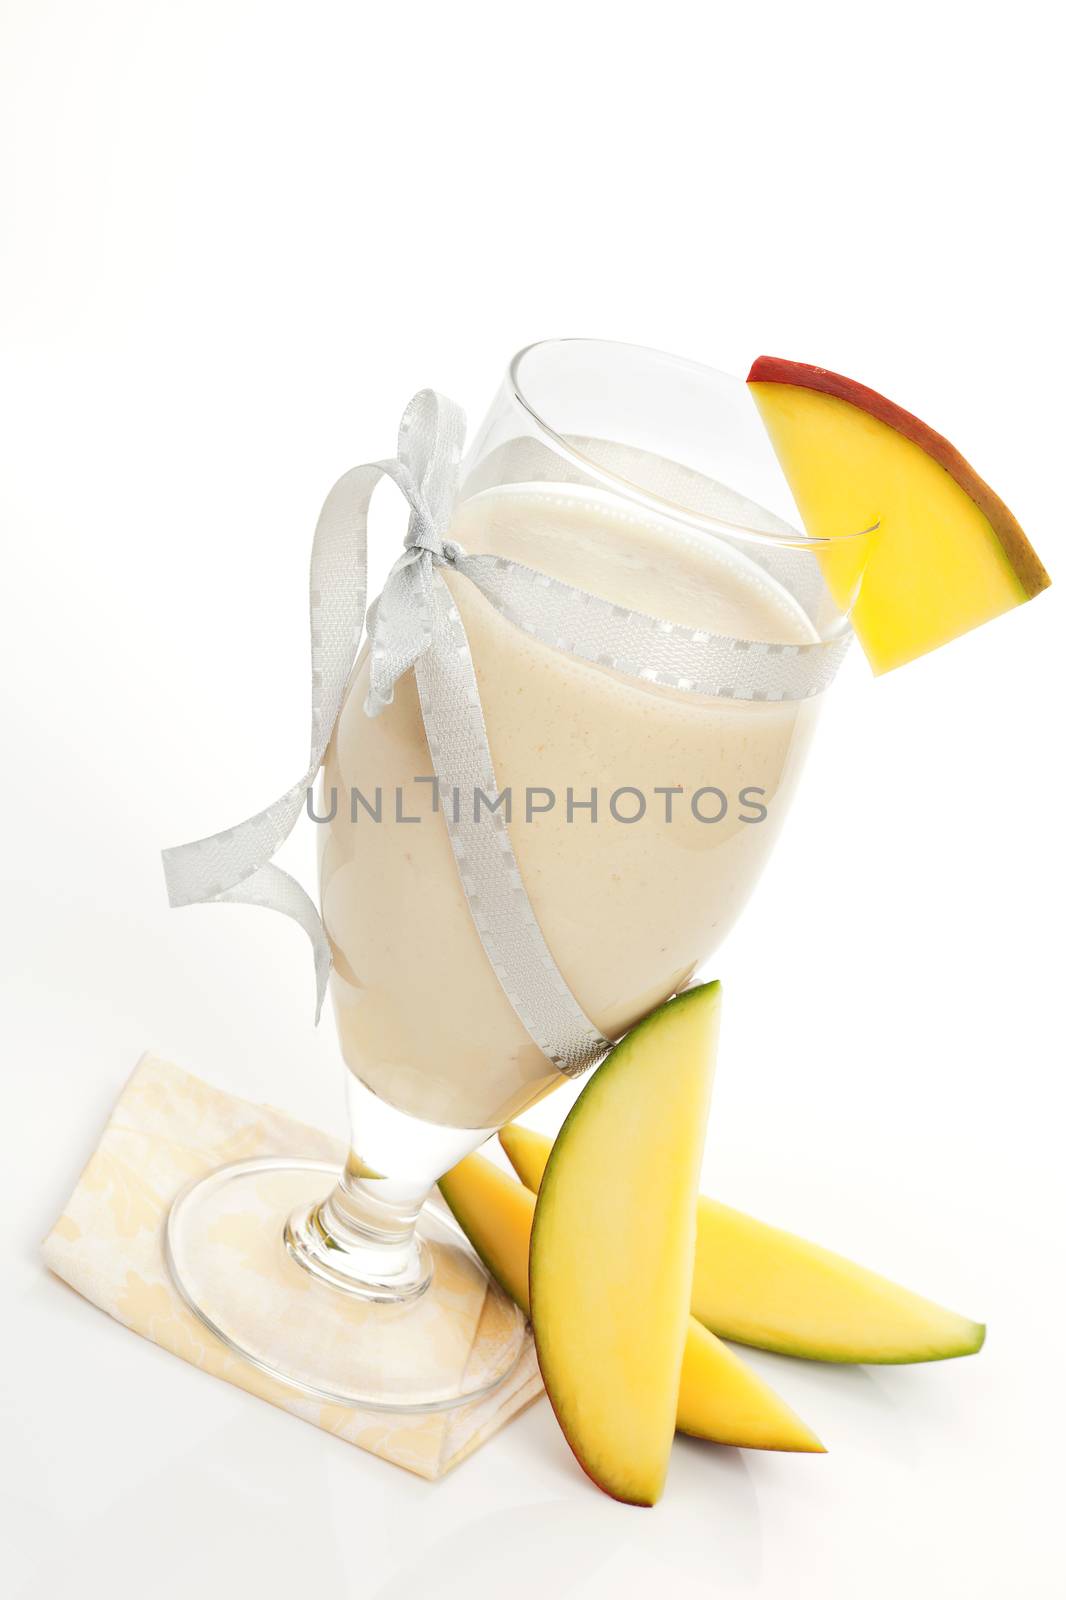 Tropical cocktail. Mango lassie in glass with fresh mango pieces isolated on white background. Summer drinks.